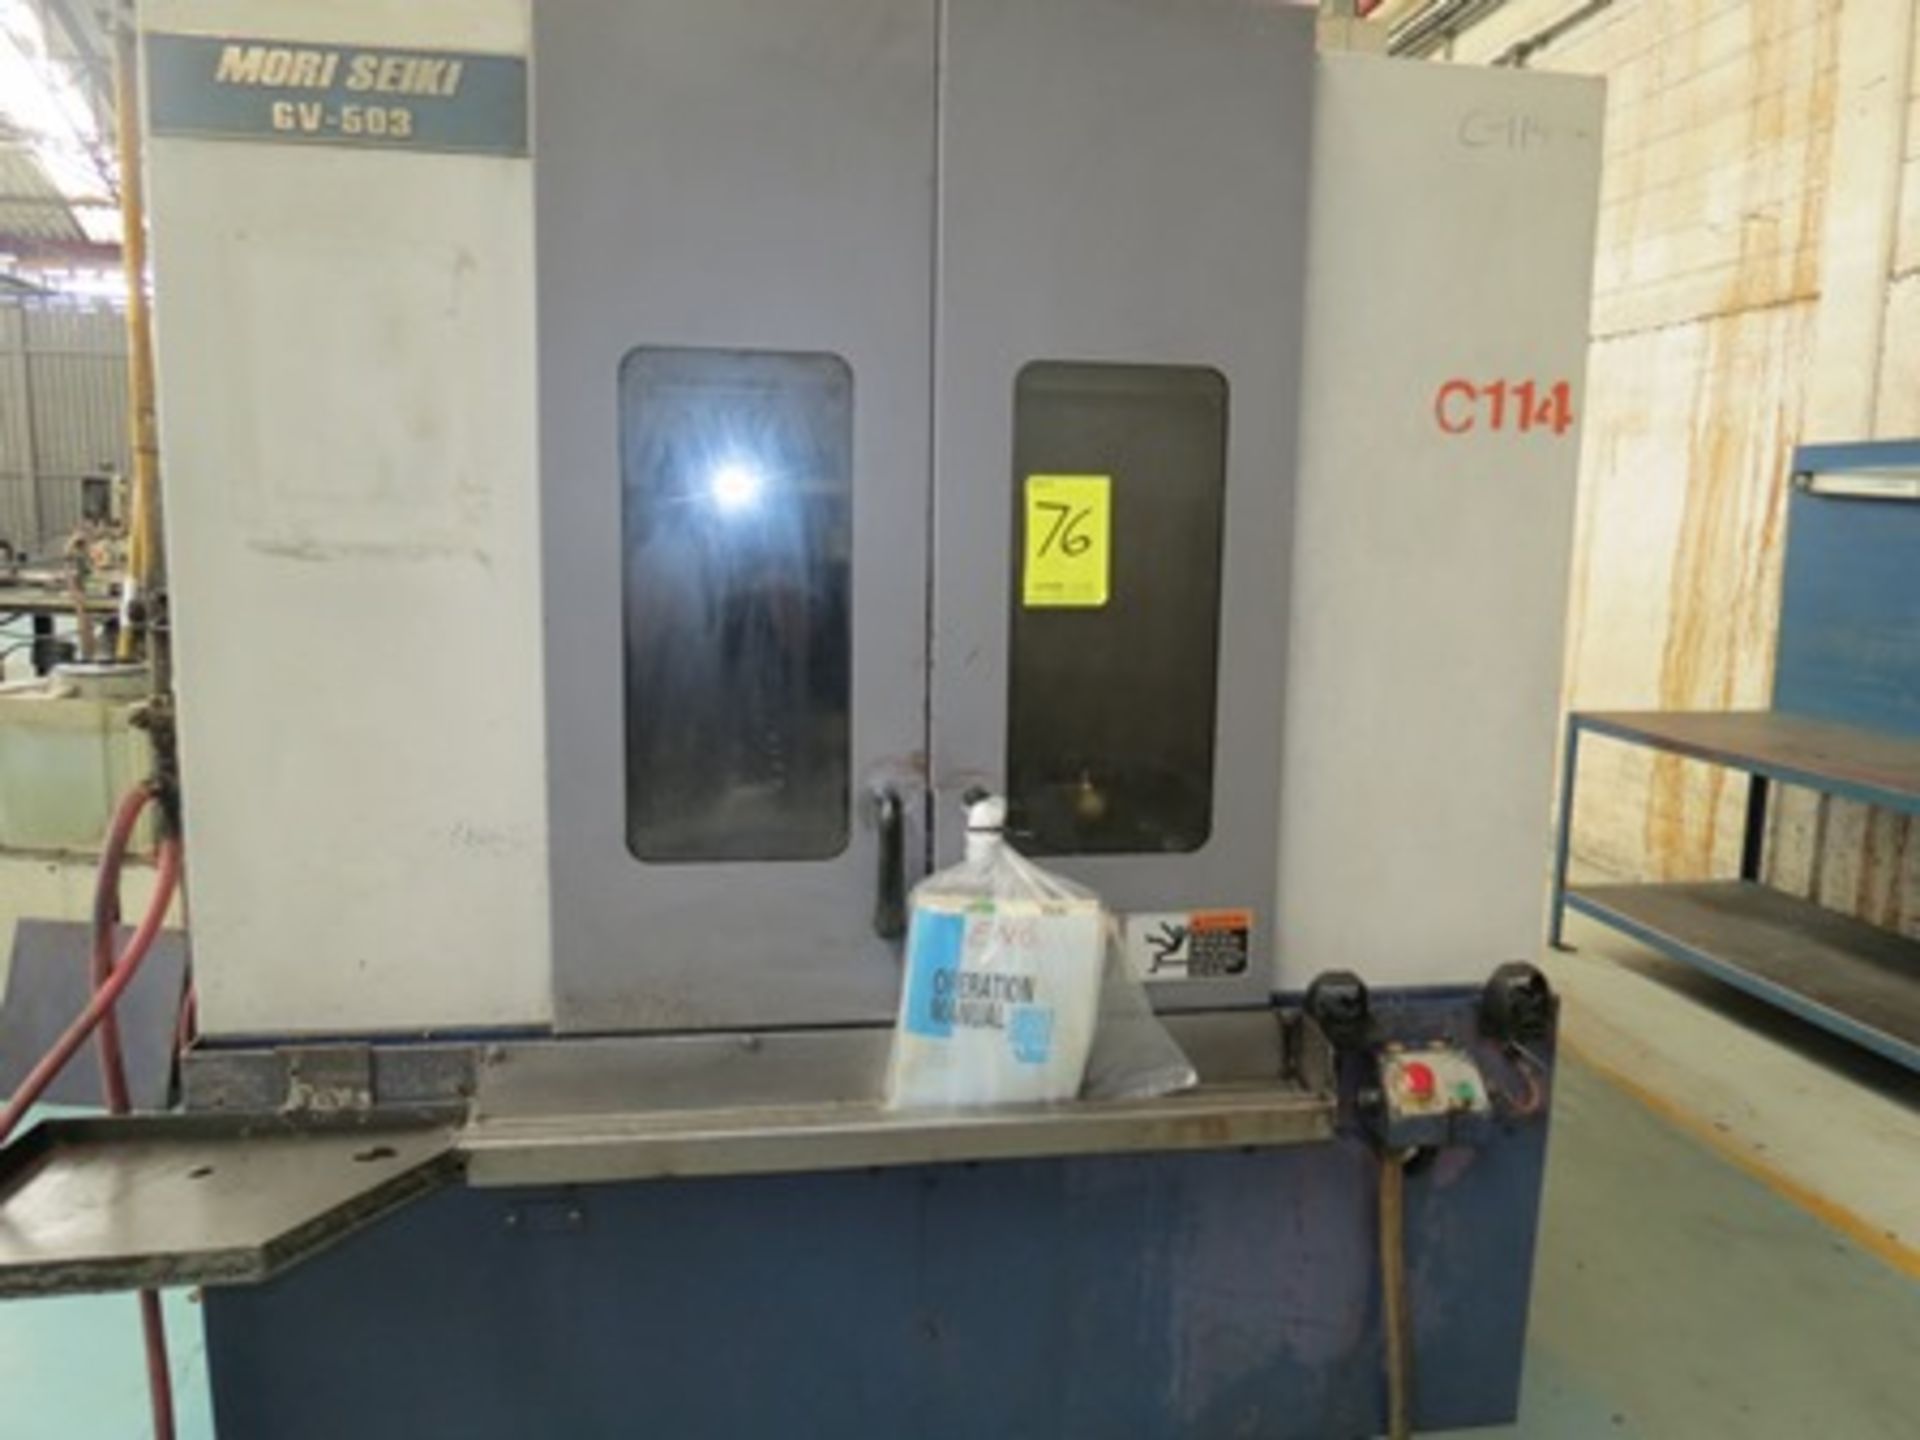 2000 Mori Seiki CNC Machining Center, Model GV503 167, with 30 tool carrier carousel, double pal …